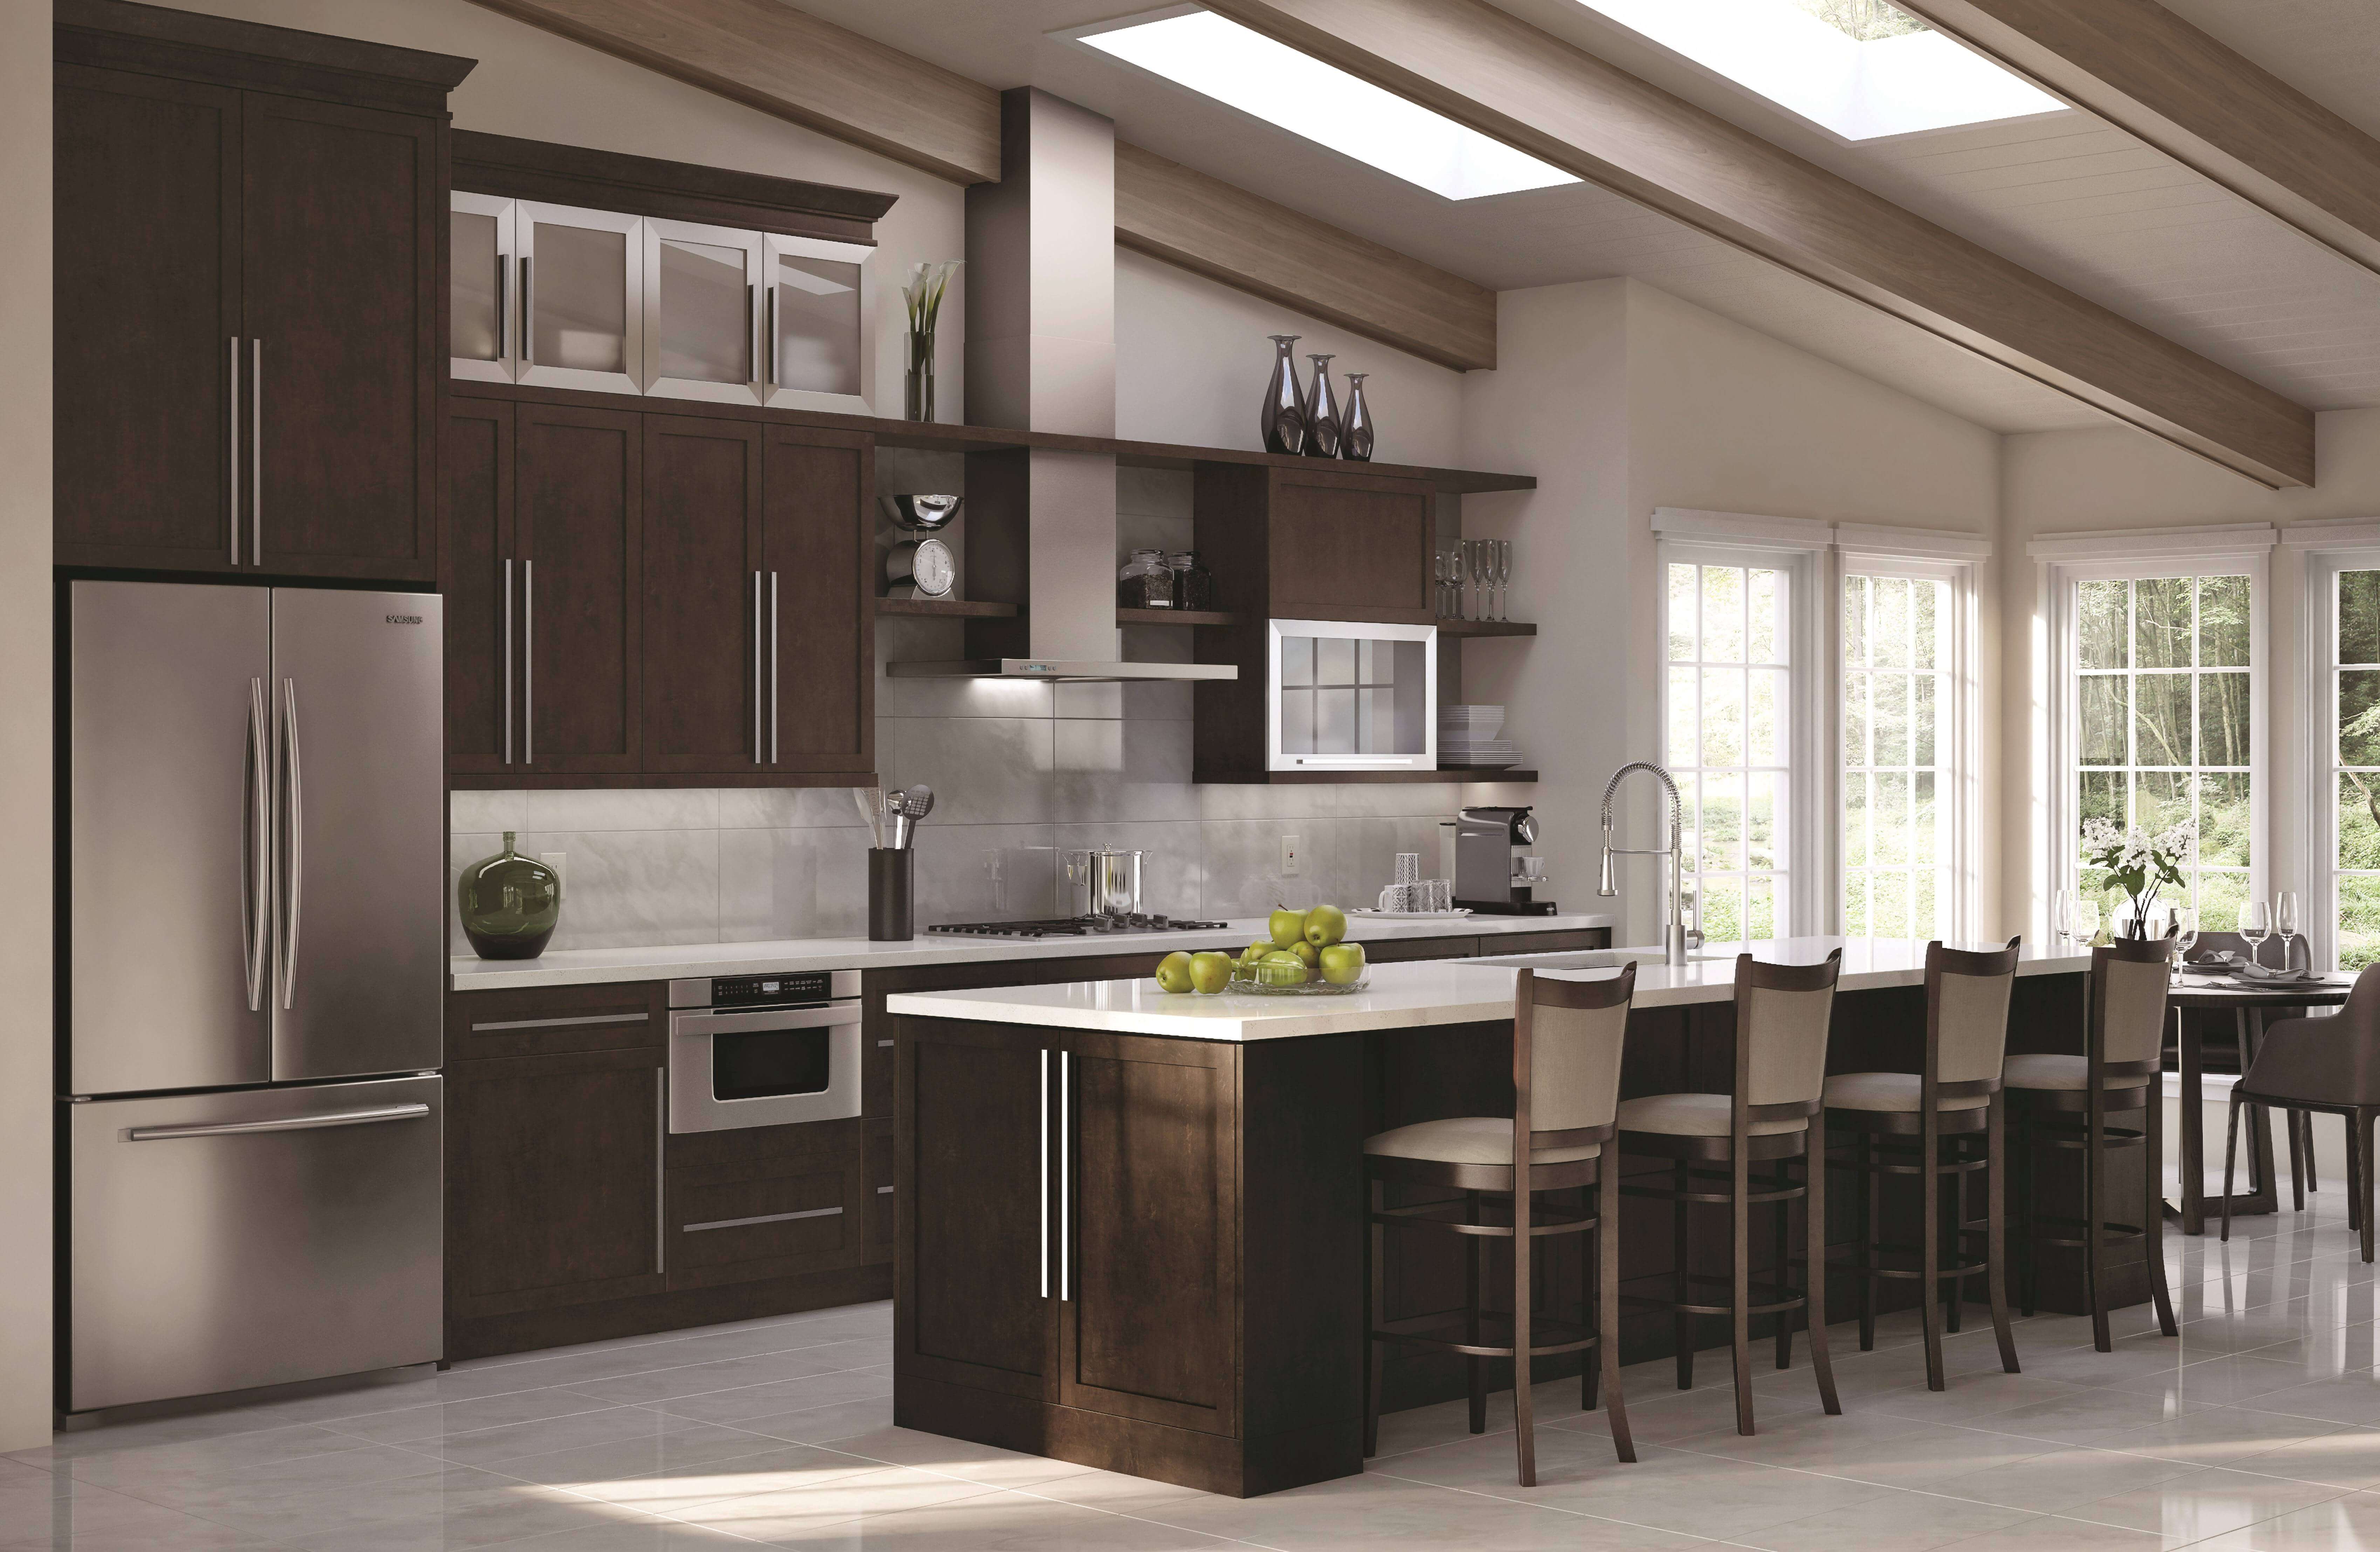 All-Wood Kitchen Cabinets